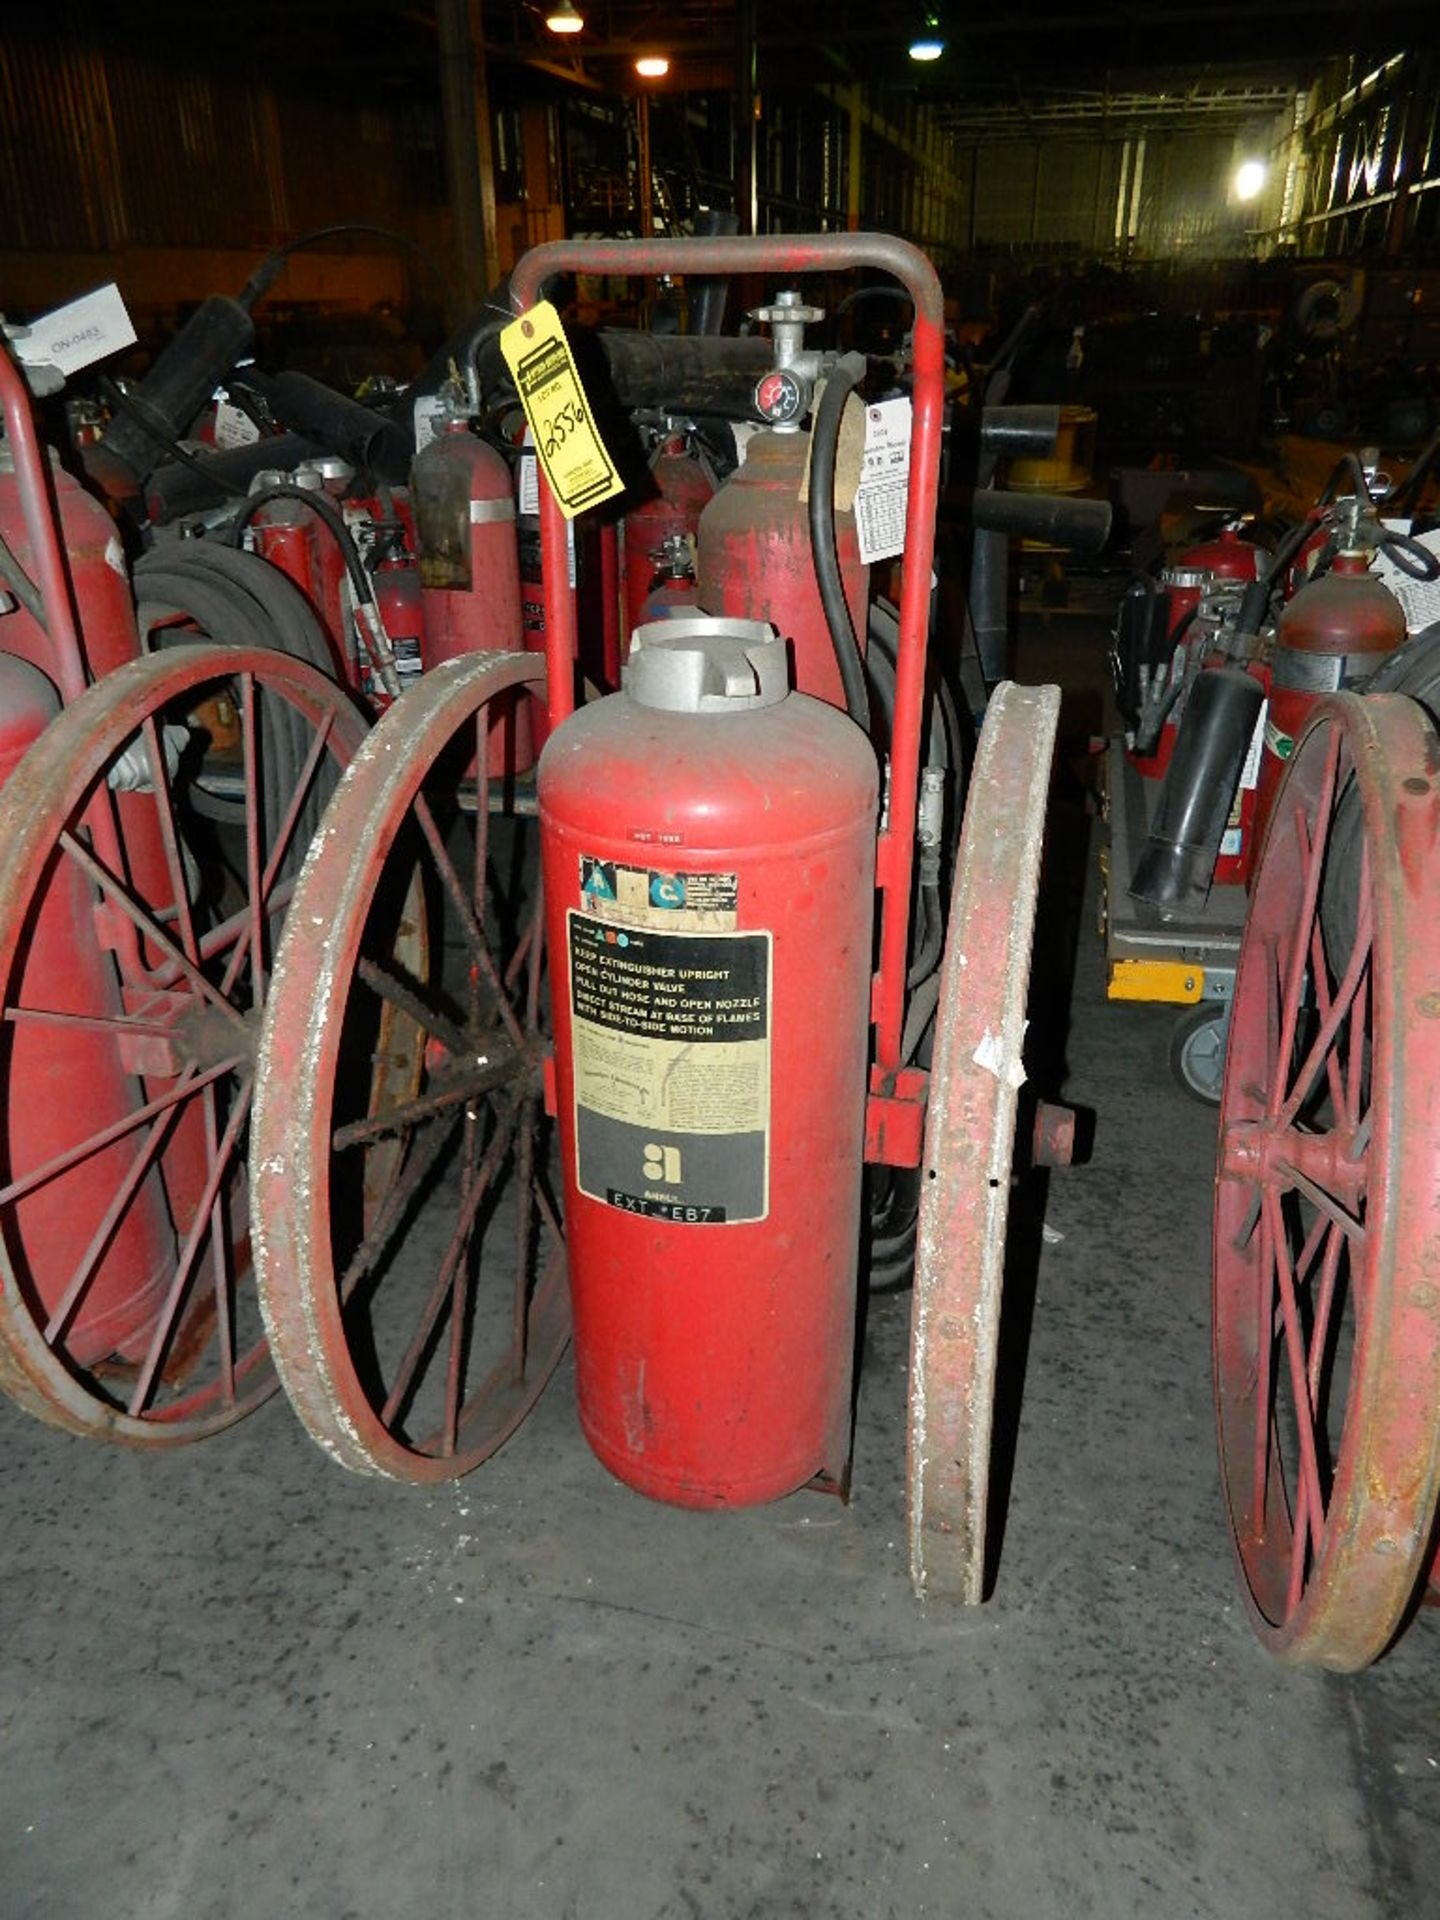 ANSUL FIRE EXTINGUISHER WITH CART & HOSE